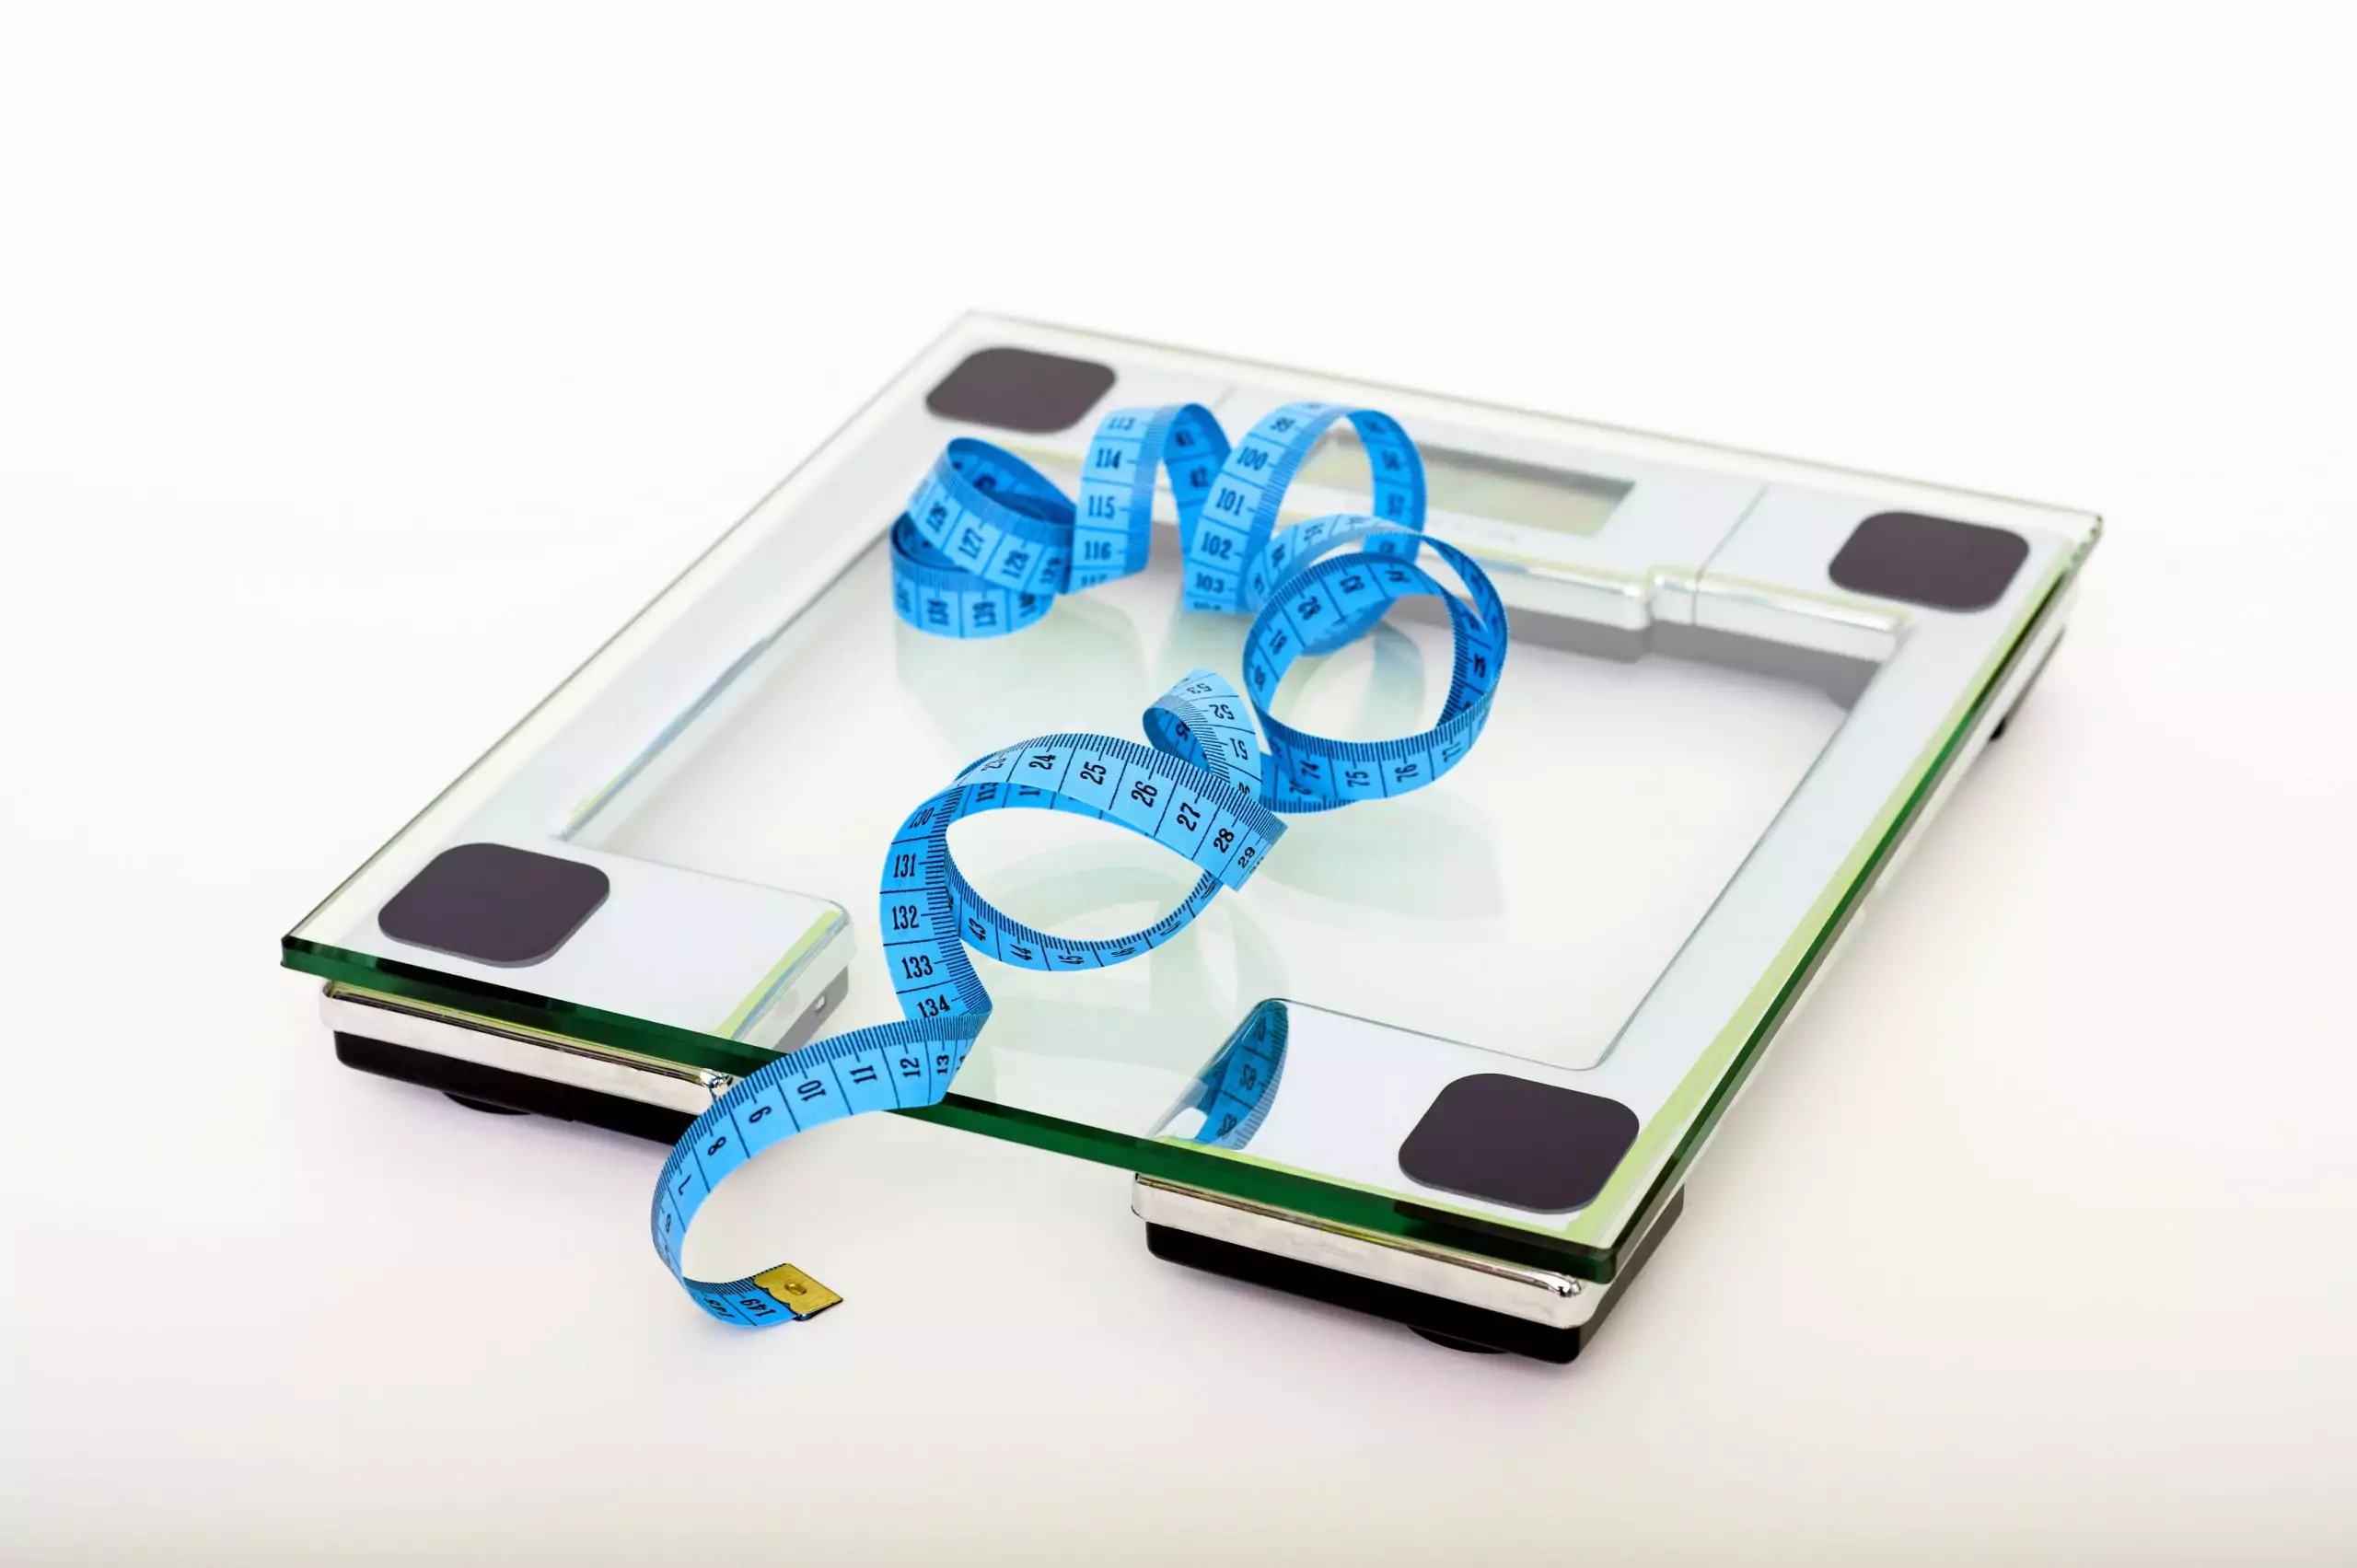 Scale and ruler to measure weight gain from fibroids